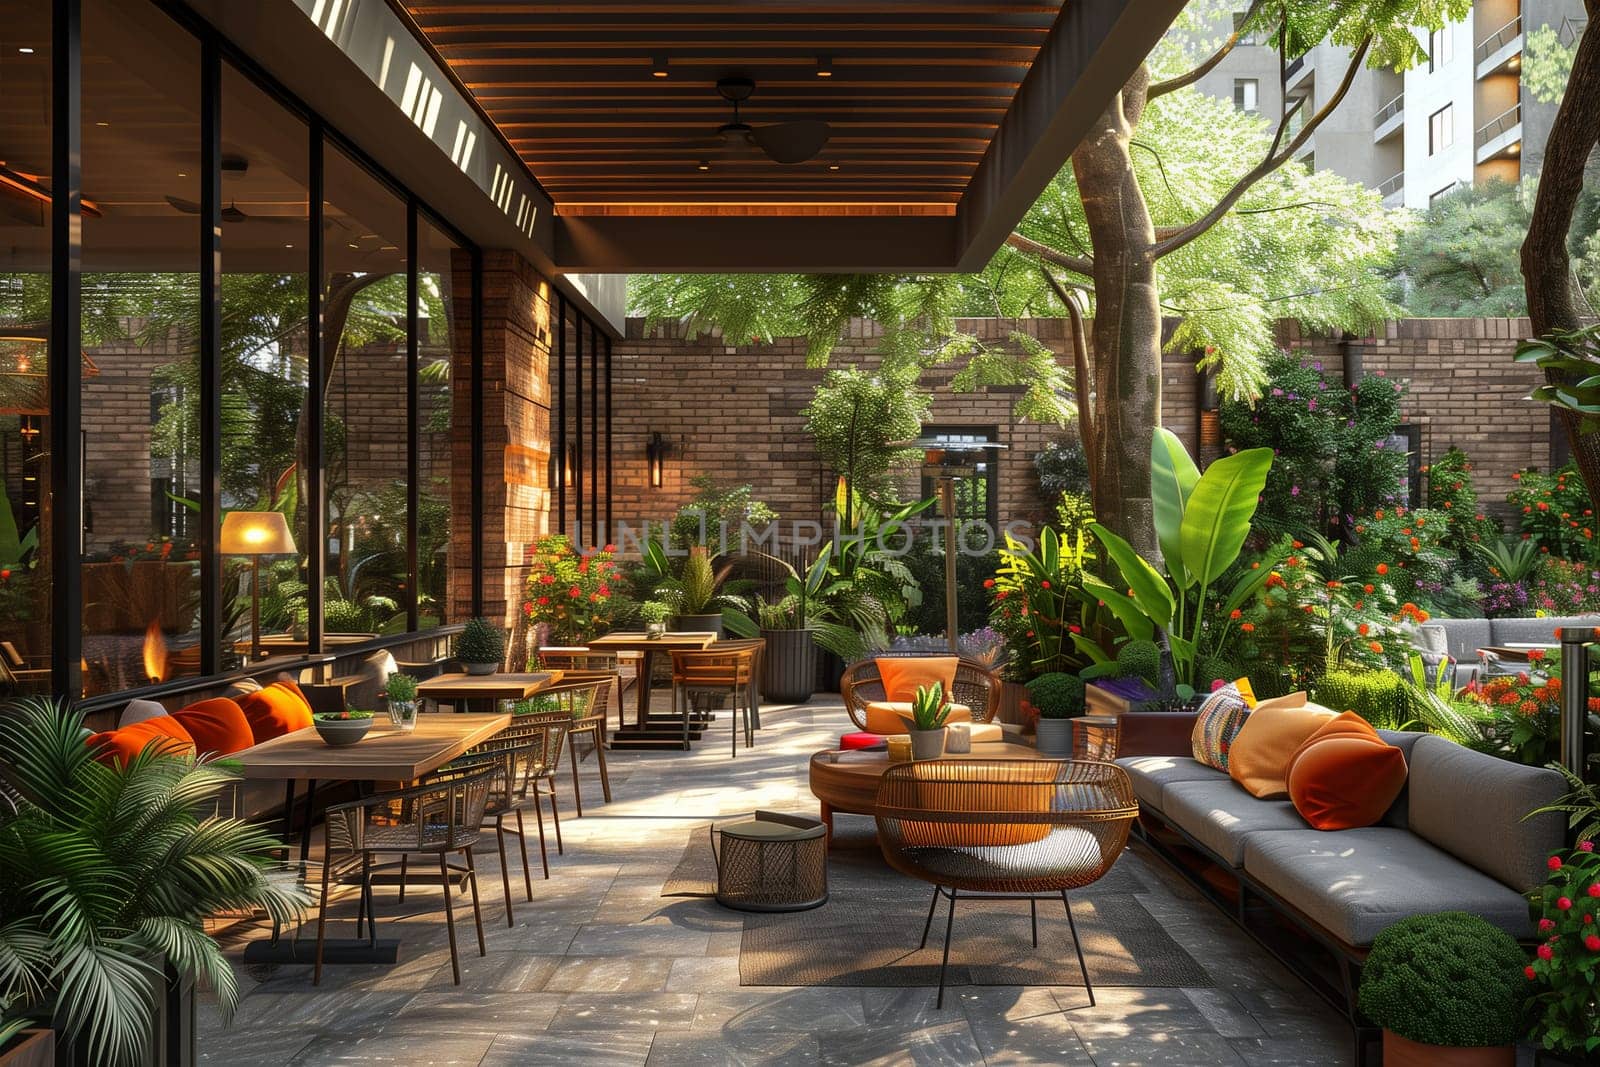 A patio area filled with multiple tables and chairs, set up for outdoor dining and socializing.